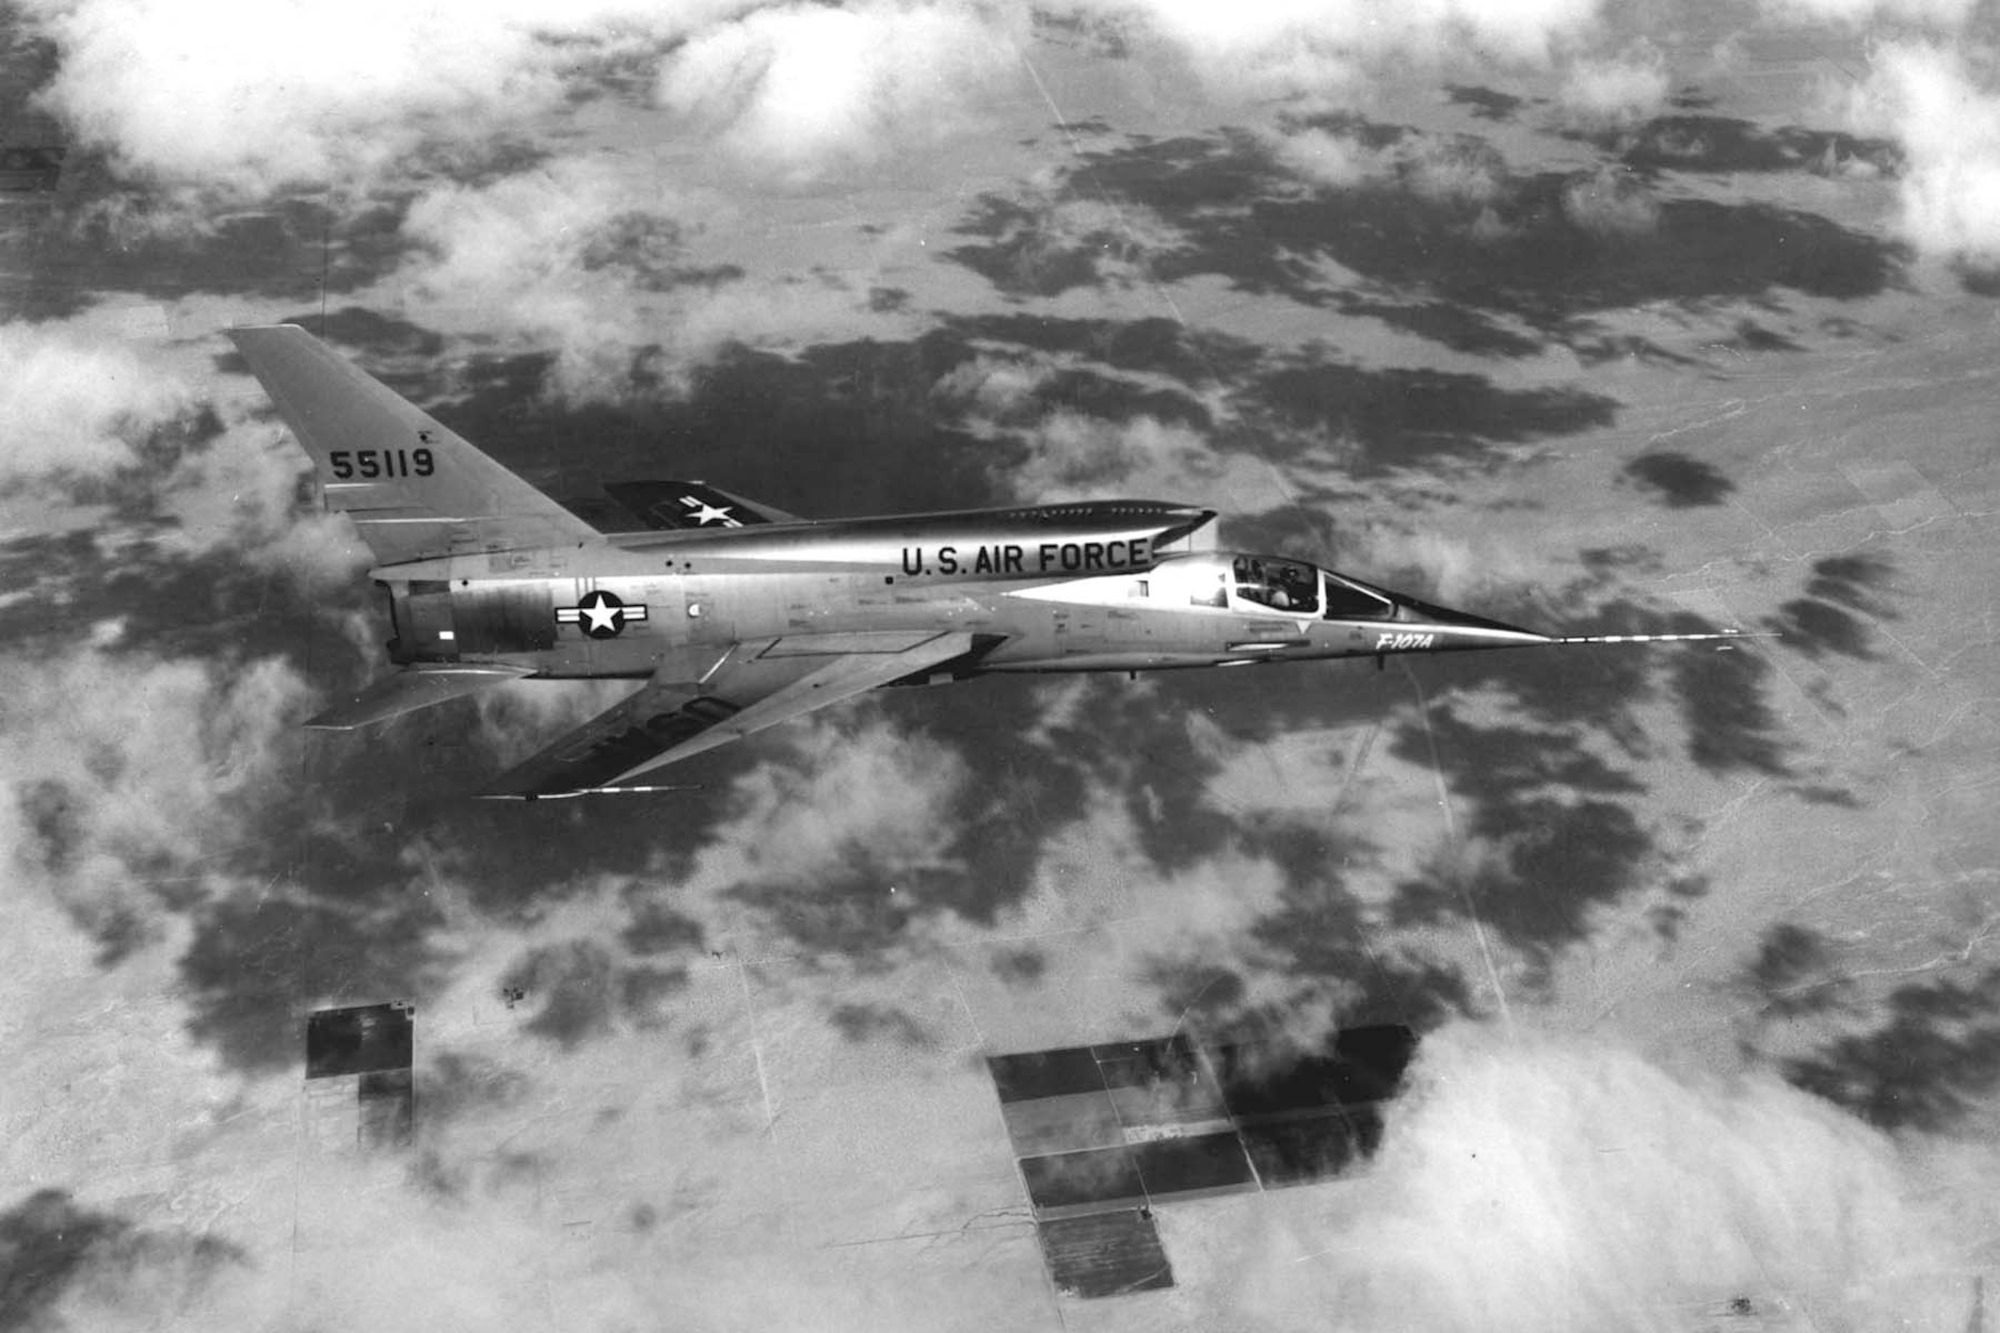 The museum's North American F-107A in flight. (U.S. Air Force photo)